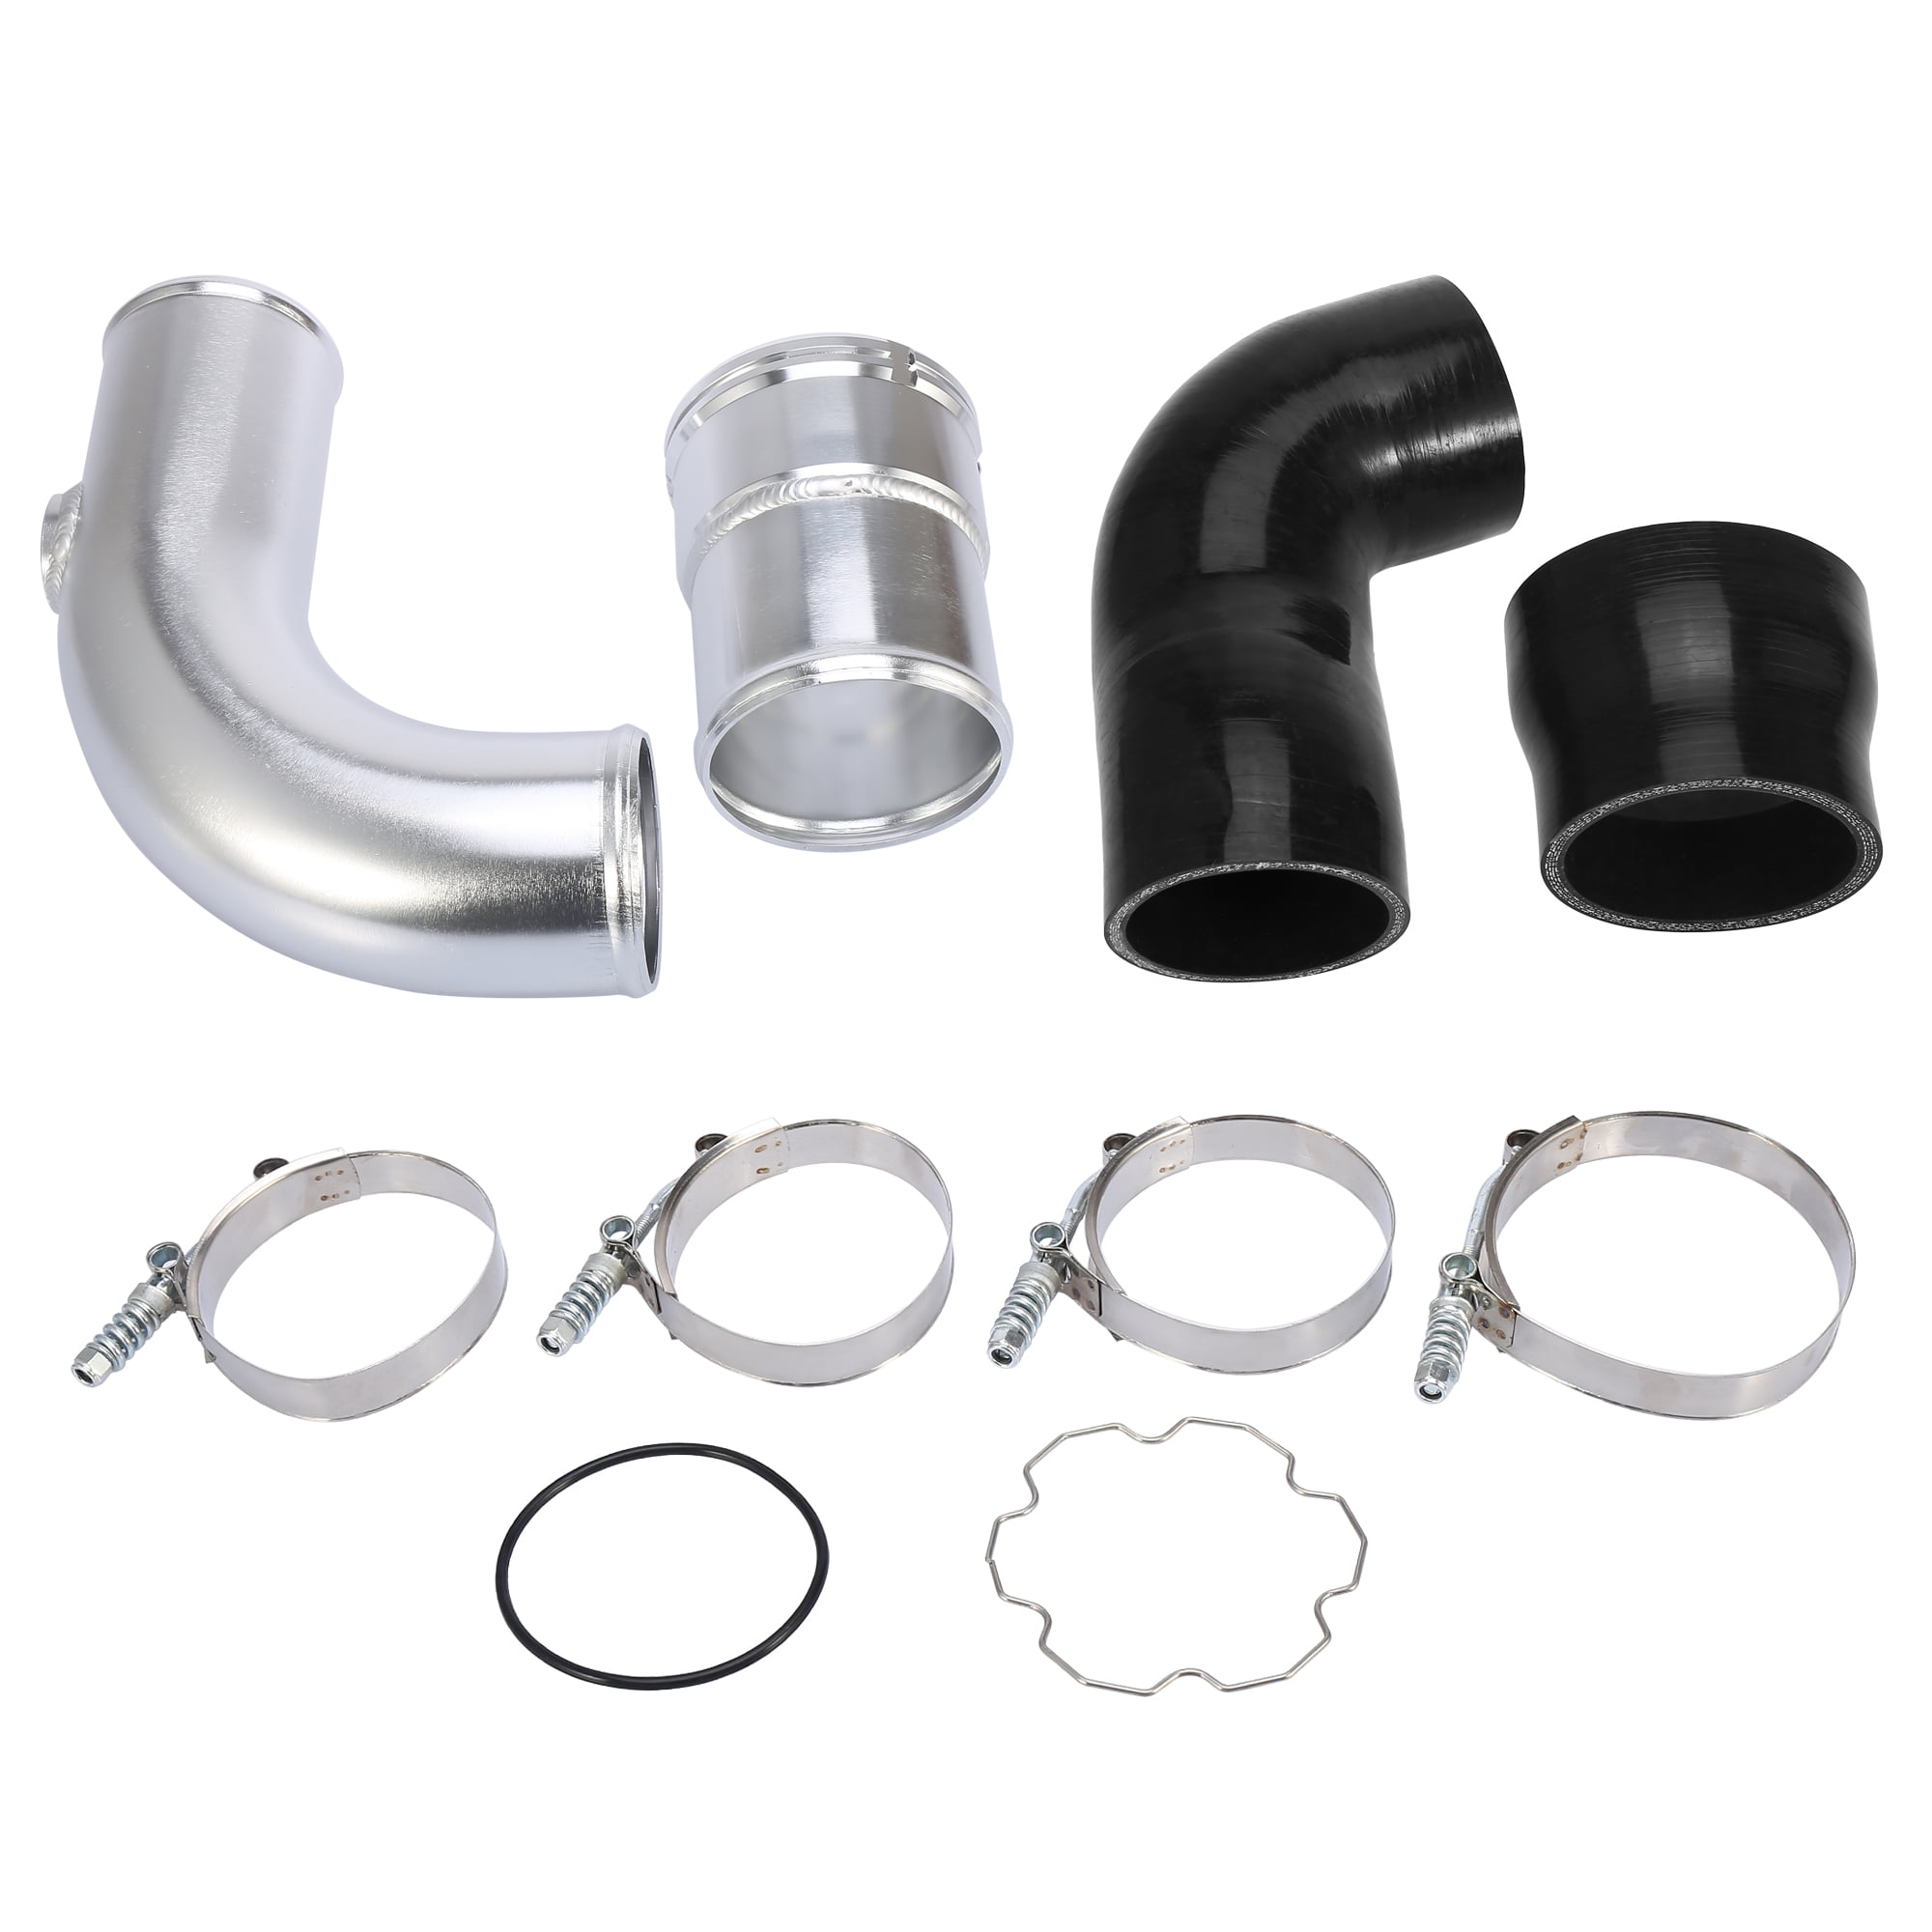 Ford F 350 Diesel Truck Radiator Hose Kit 48" Chrome with 4 Couplings/Cut into